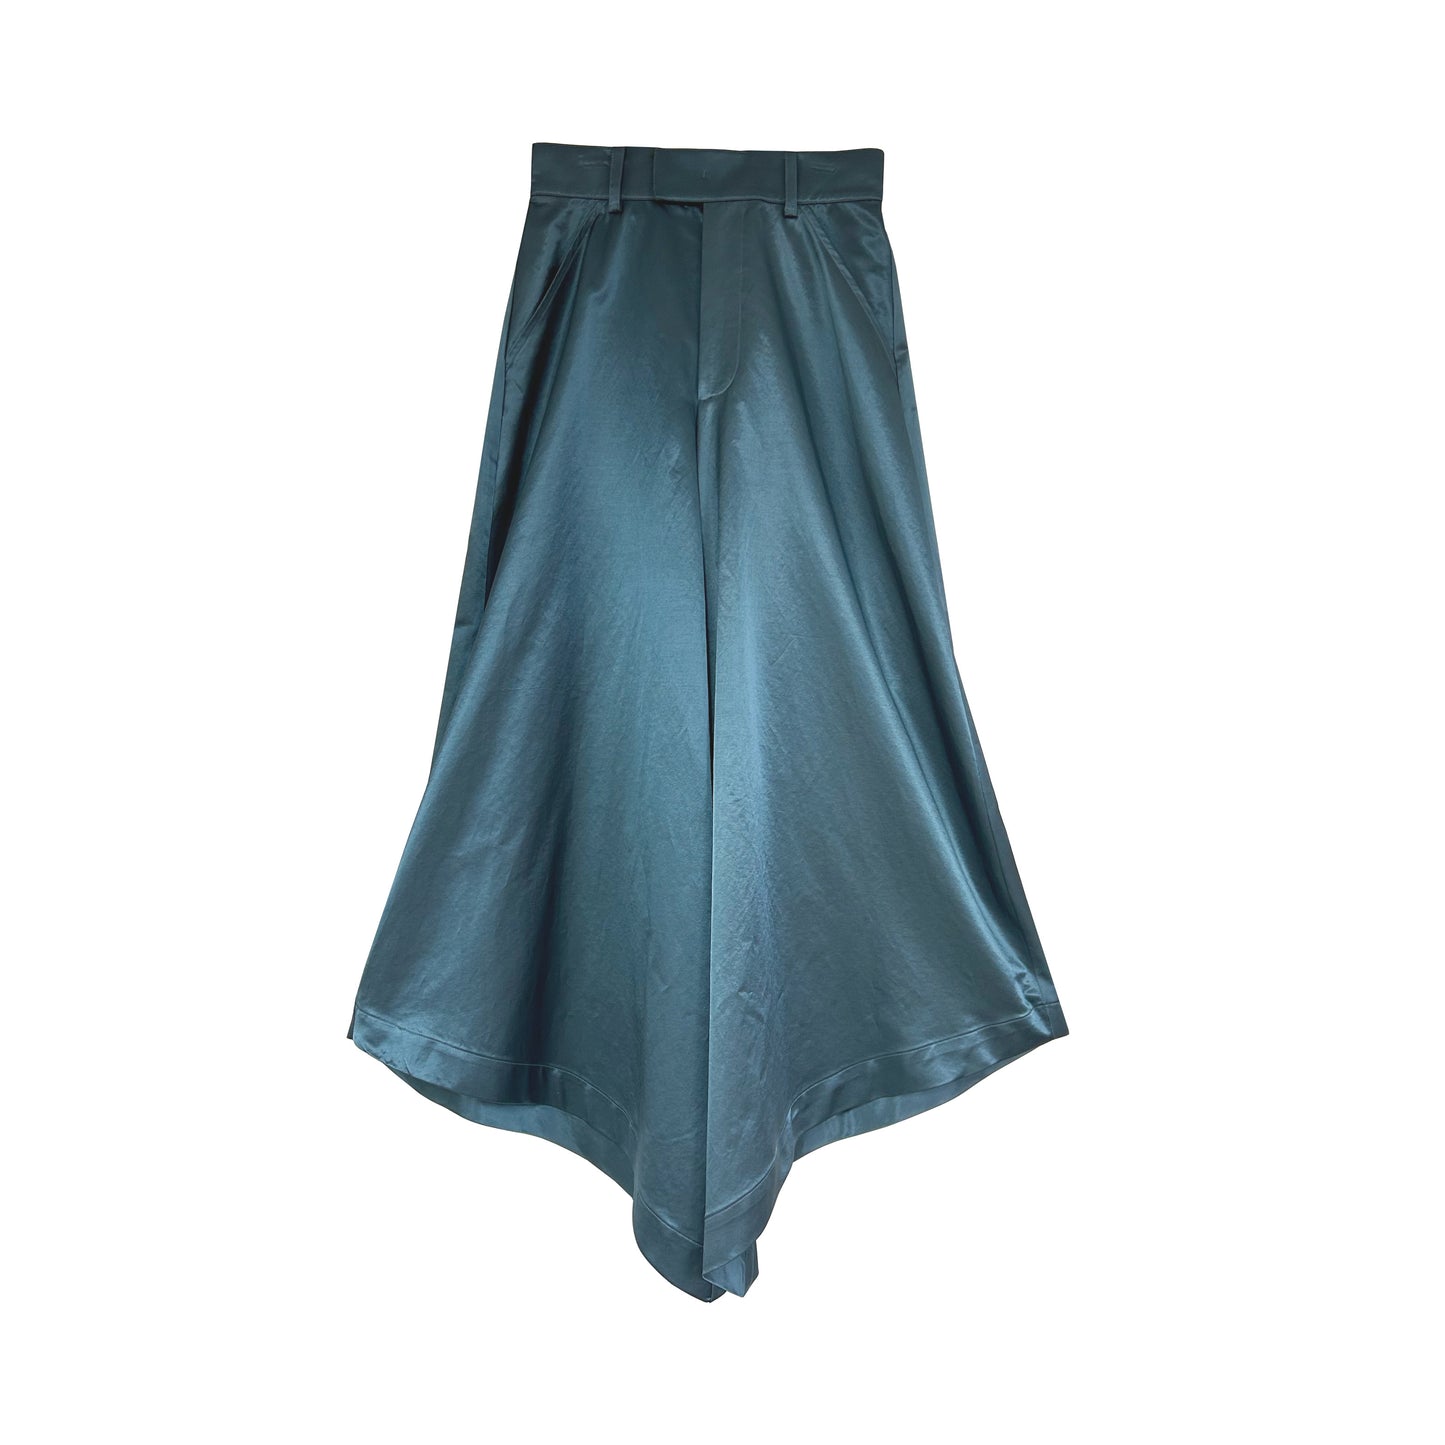 Wide Flare High Waisted Pants in Teal Blue Satin